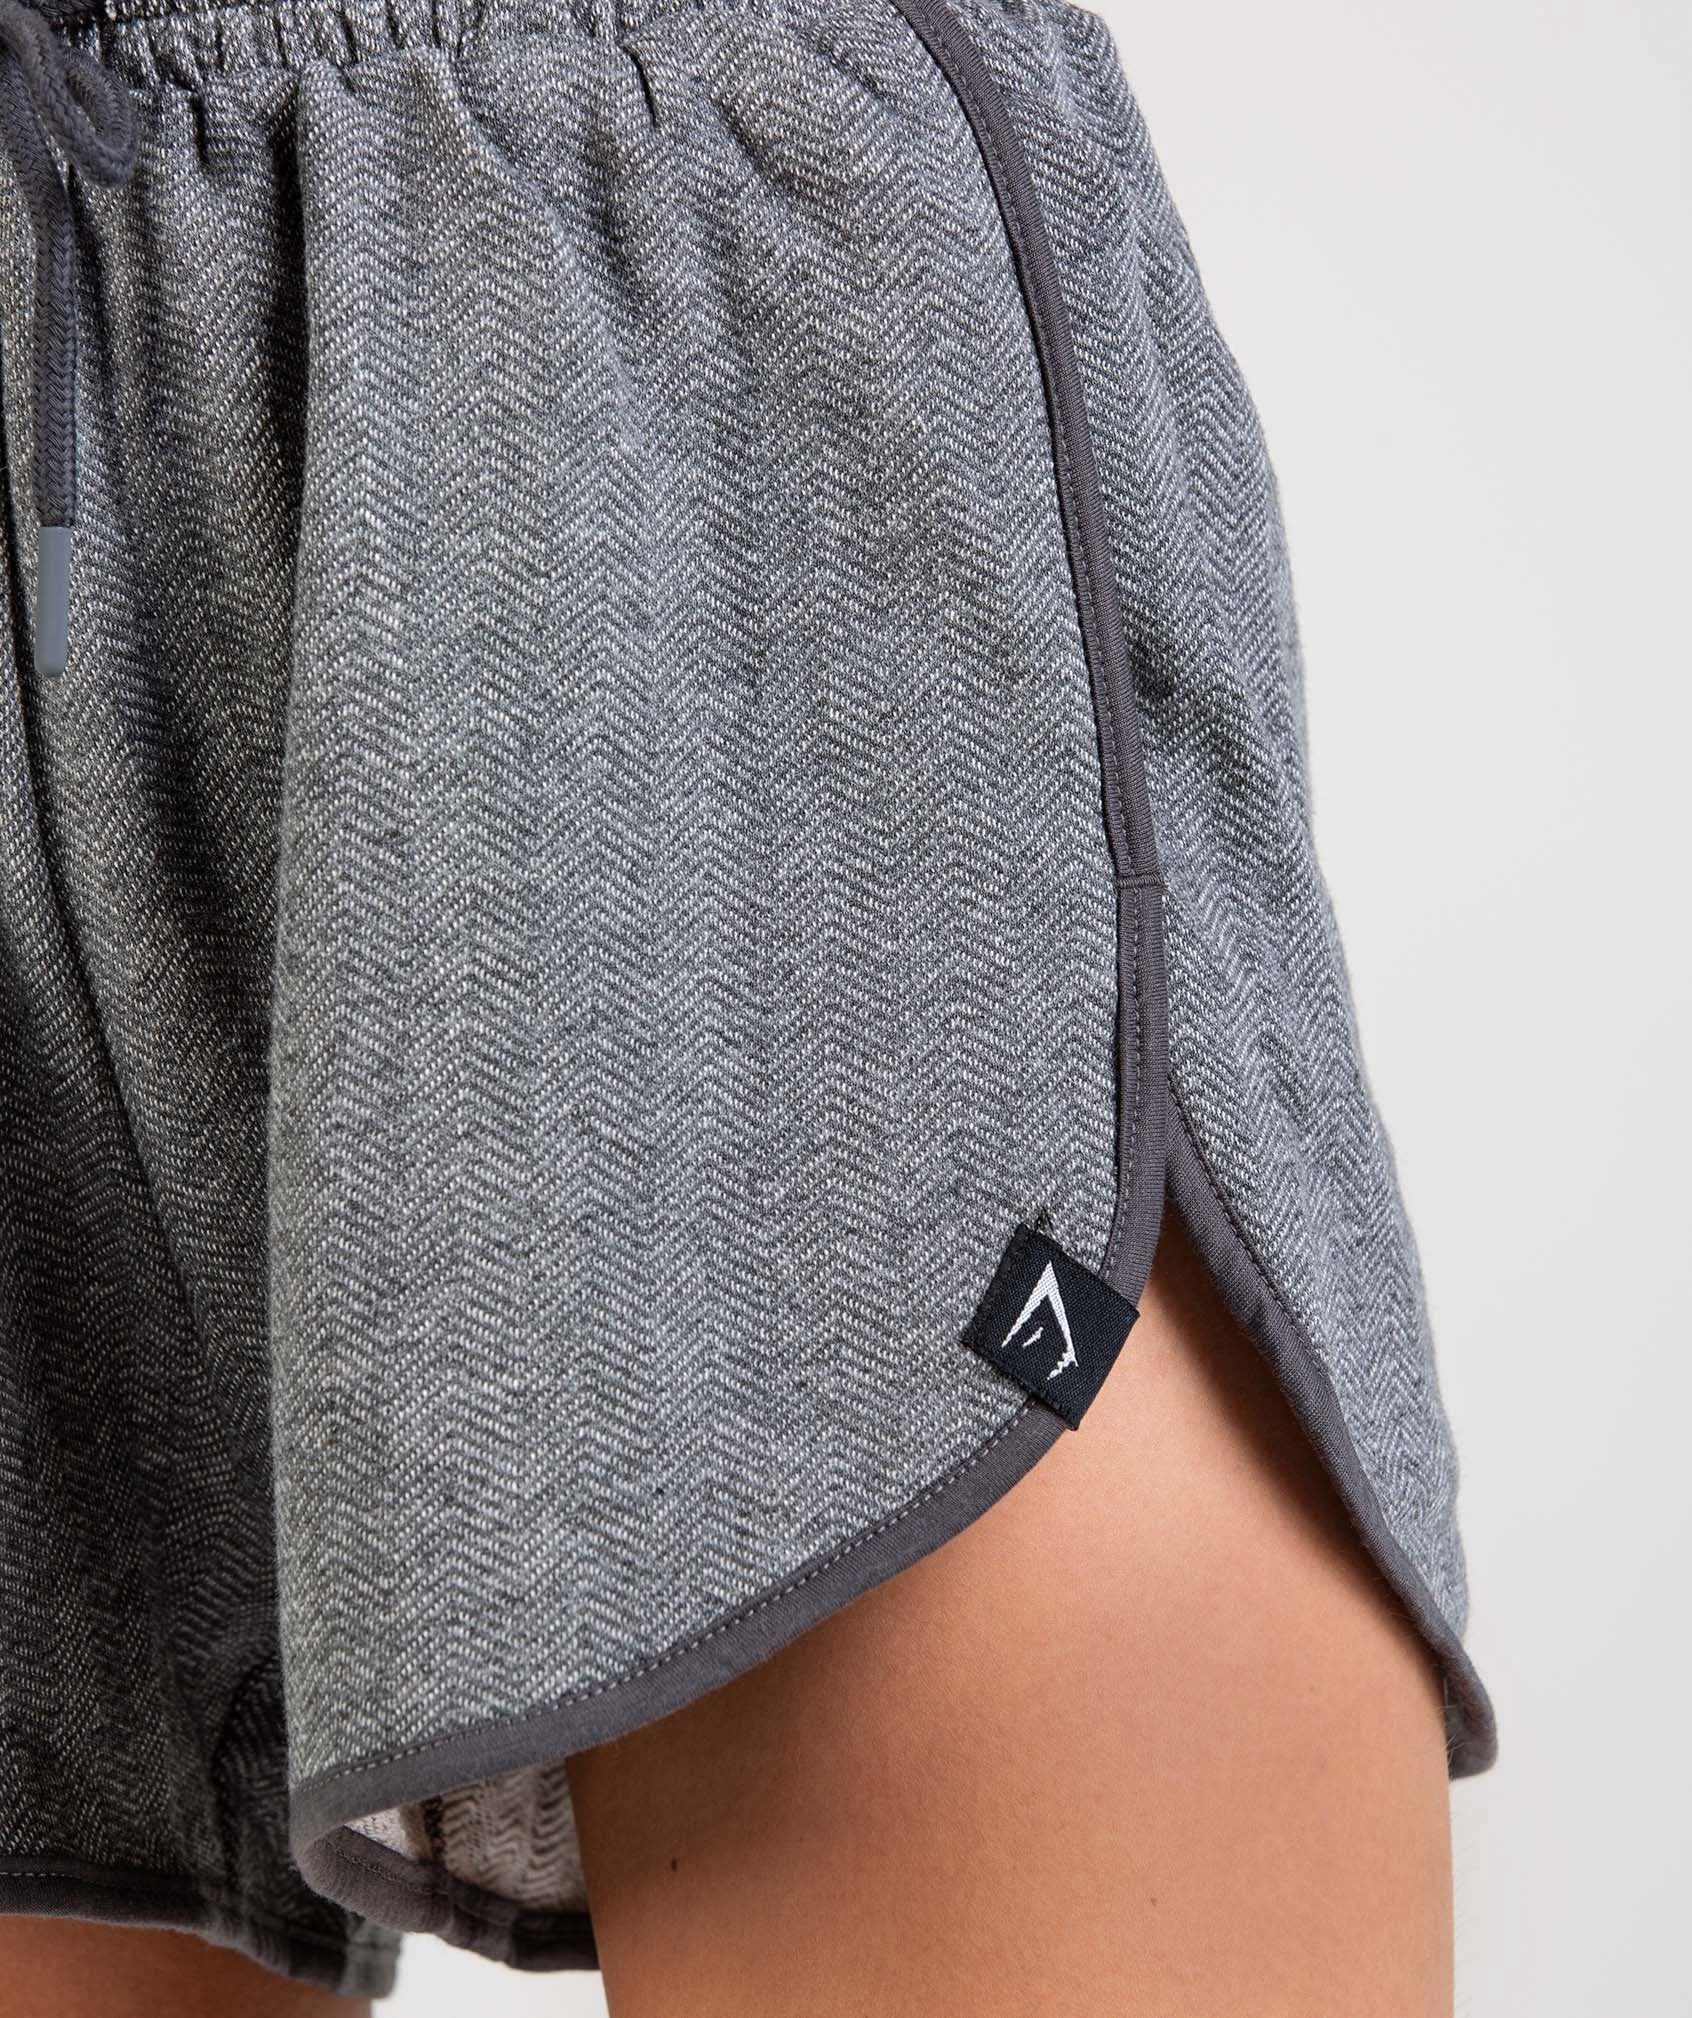 Heather Dual Band Shorts in Charcoal Marl - view 5